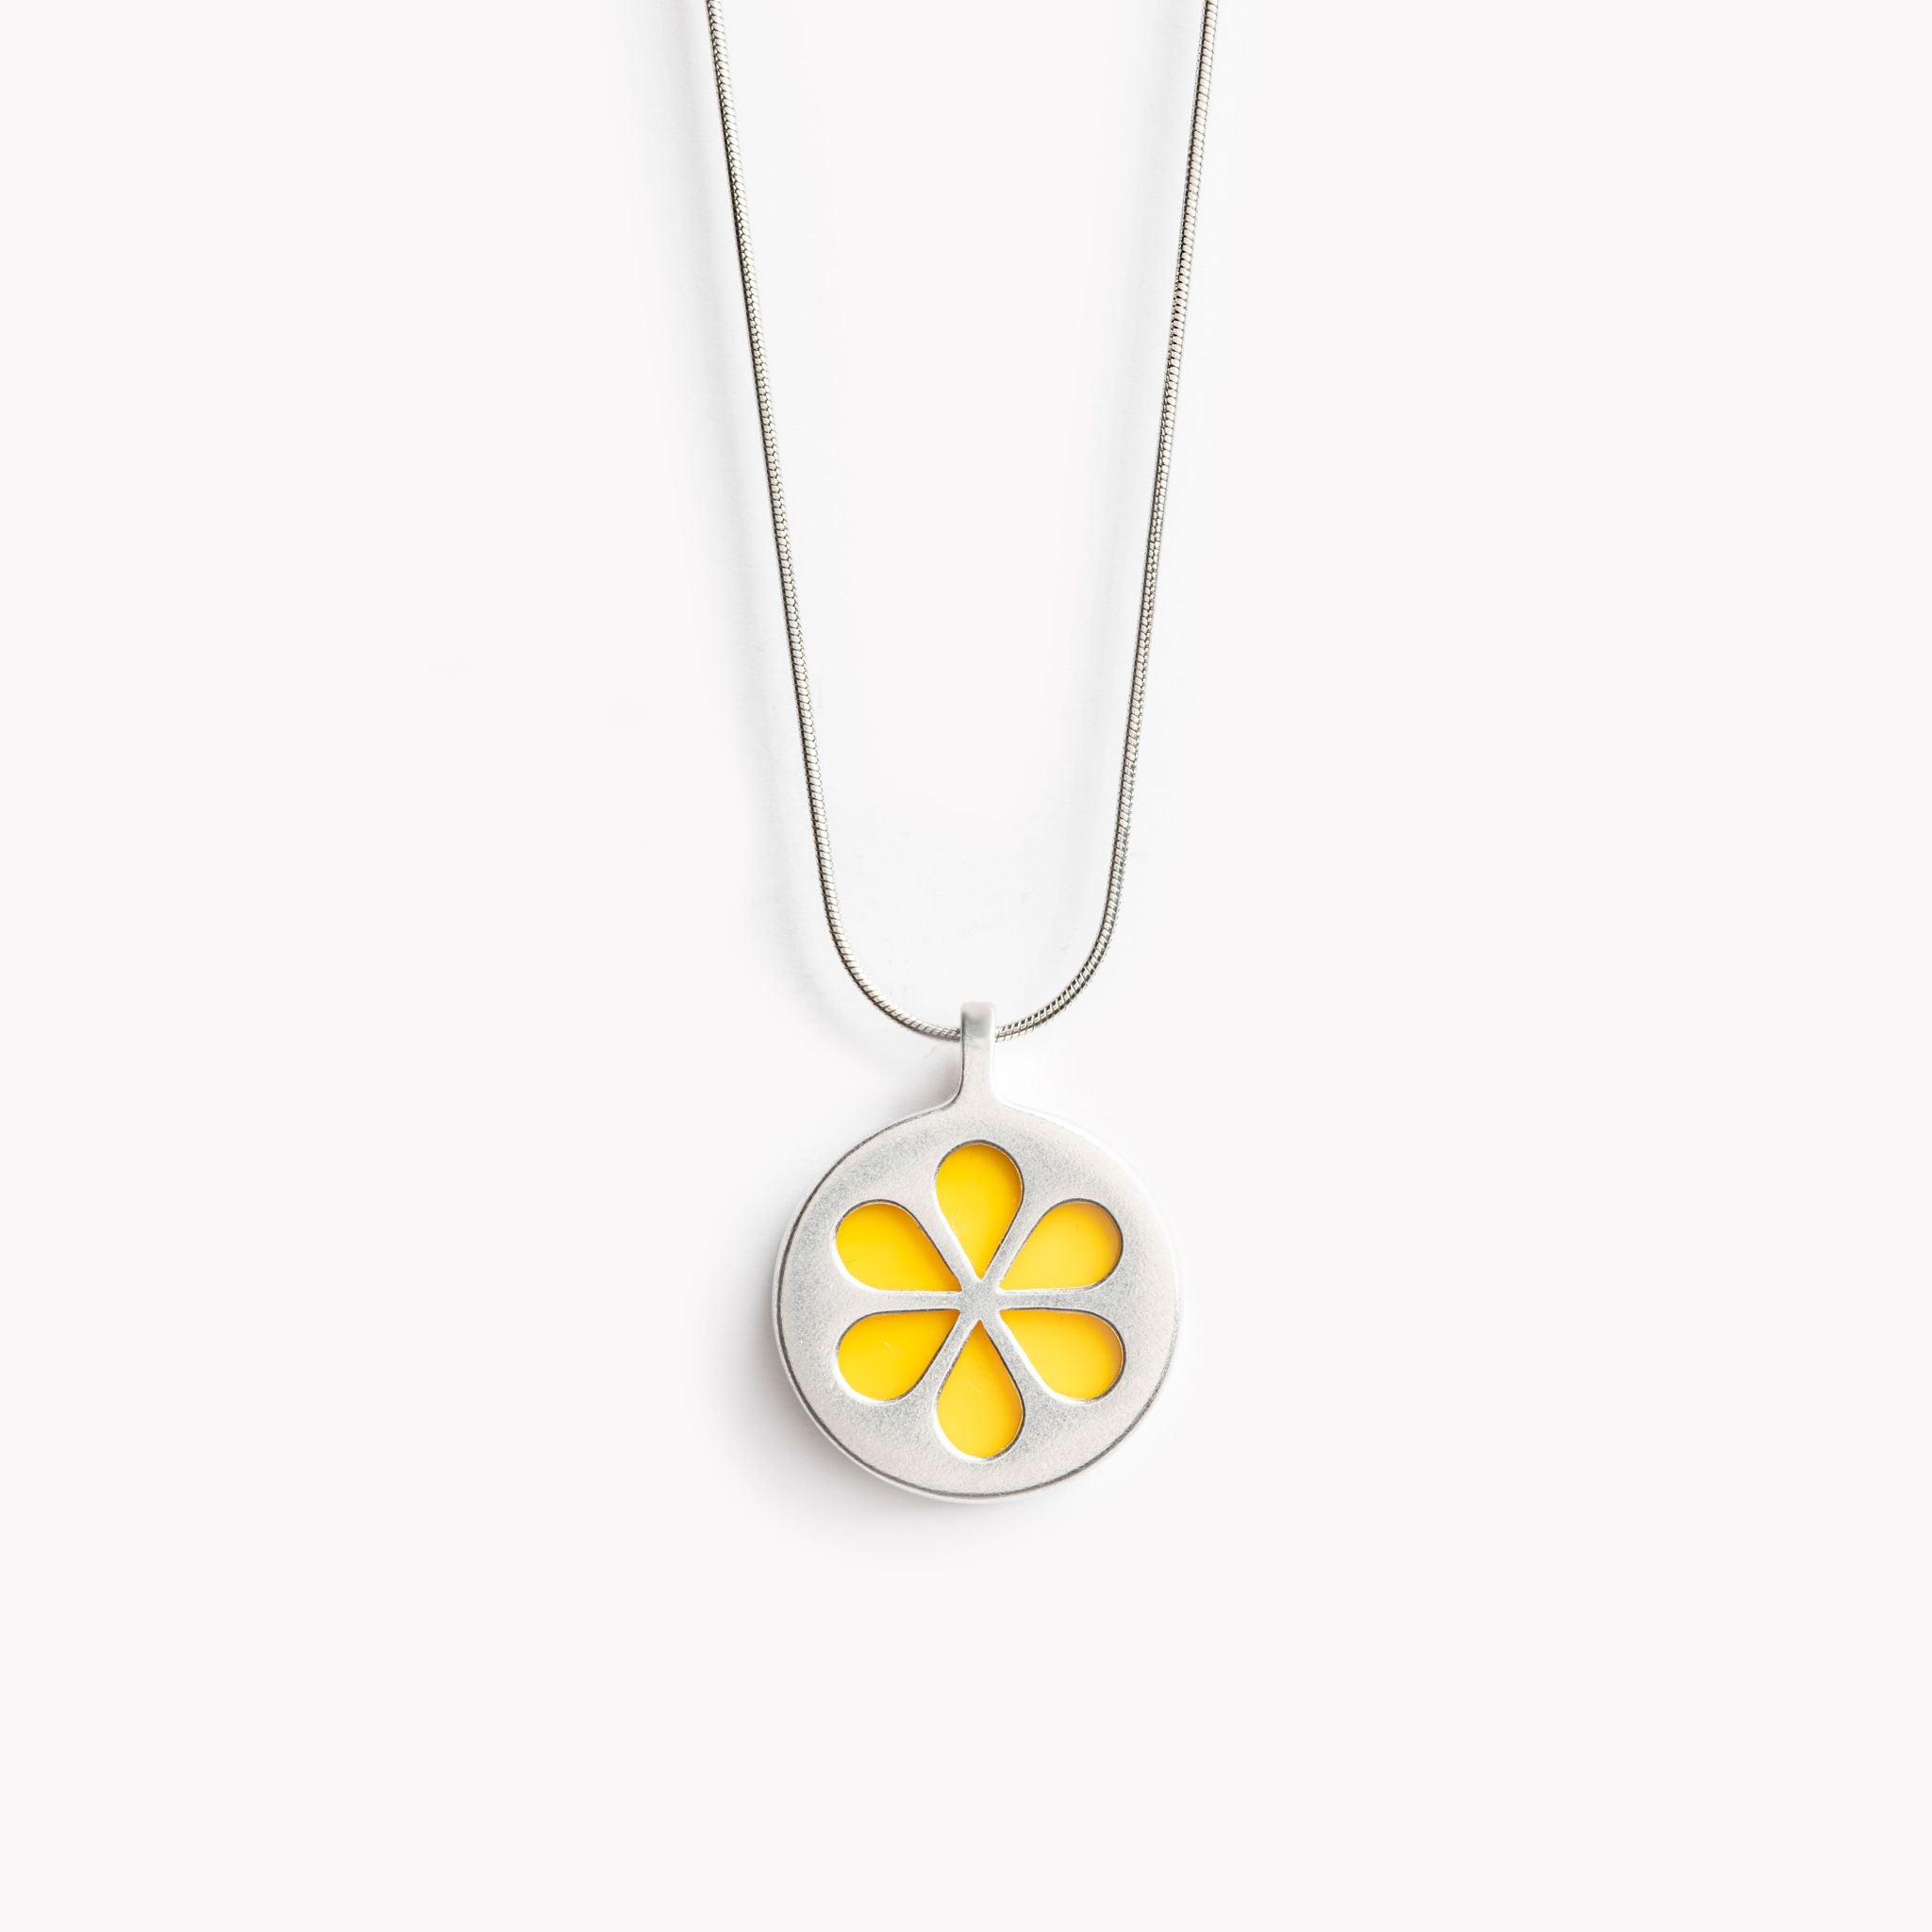 Koa jewellery Orchid necklace in yellow.